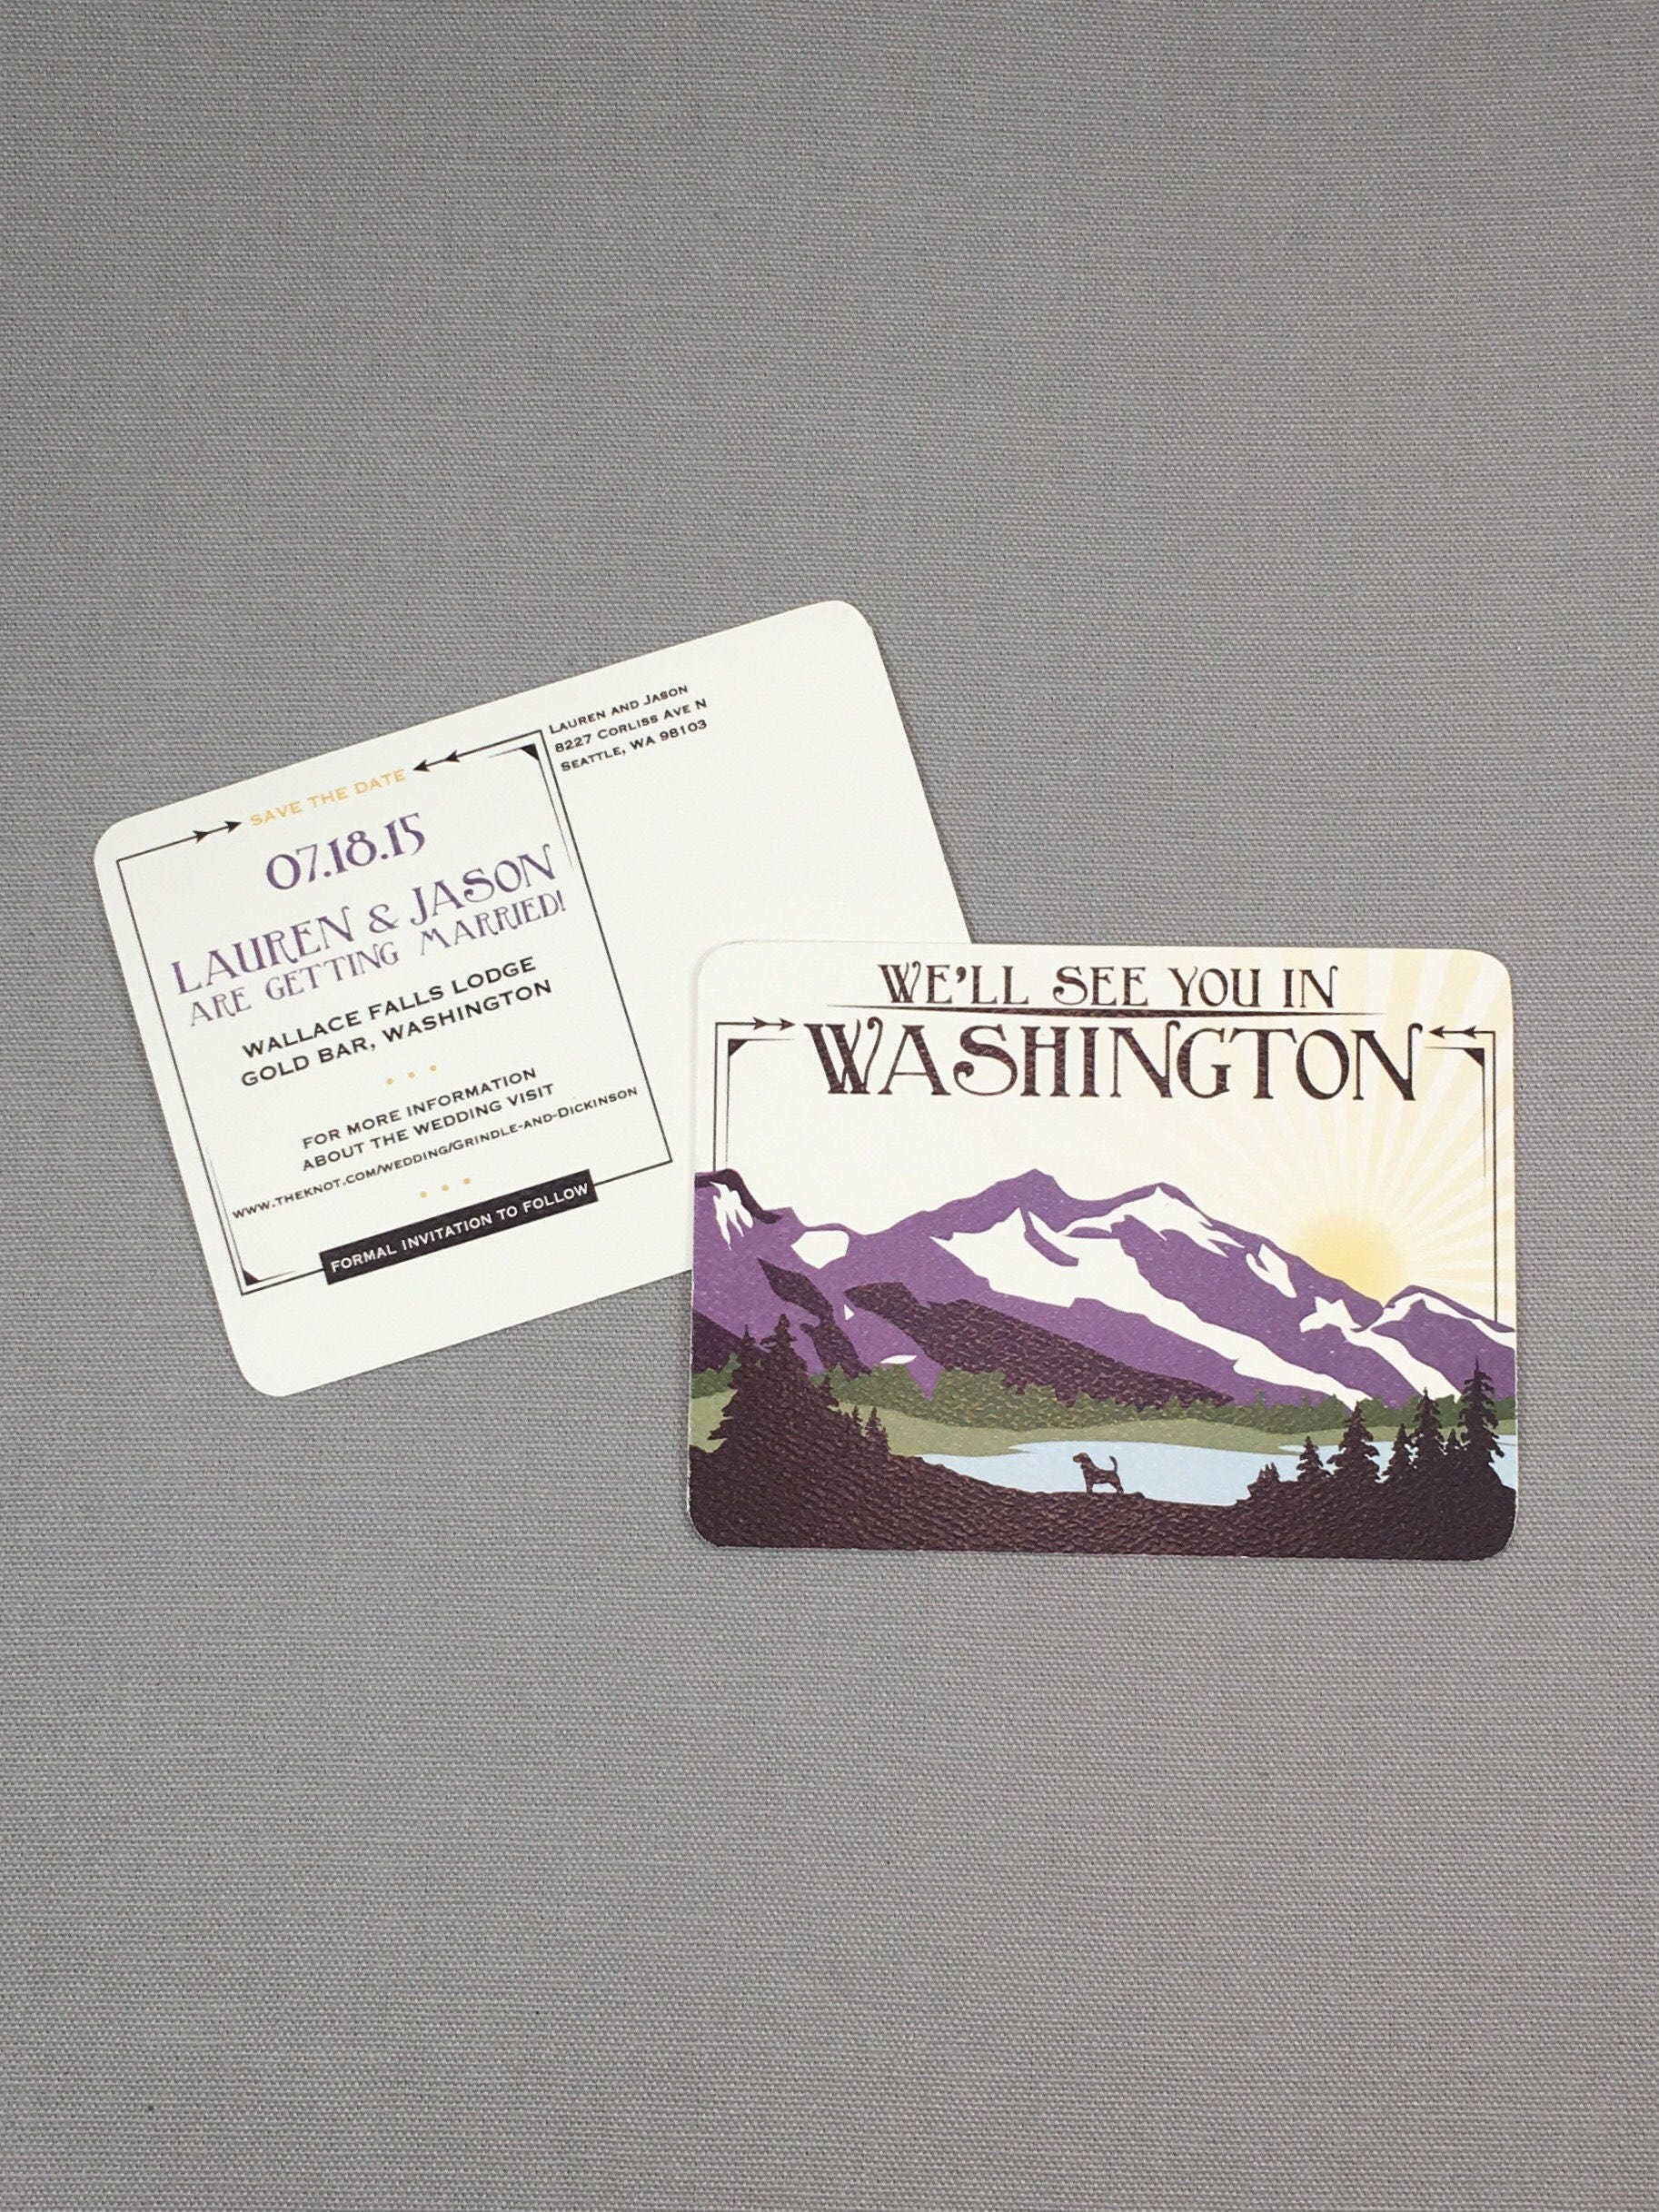 Sleeping Lady Purple Mountains with Dog Wedding Save the Date Postcards // Washington Mountain Save the Date